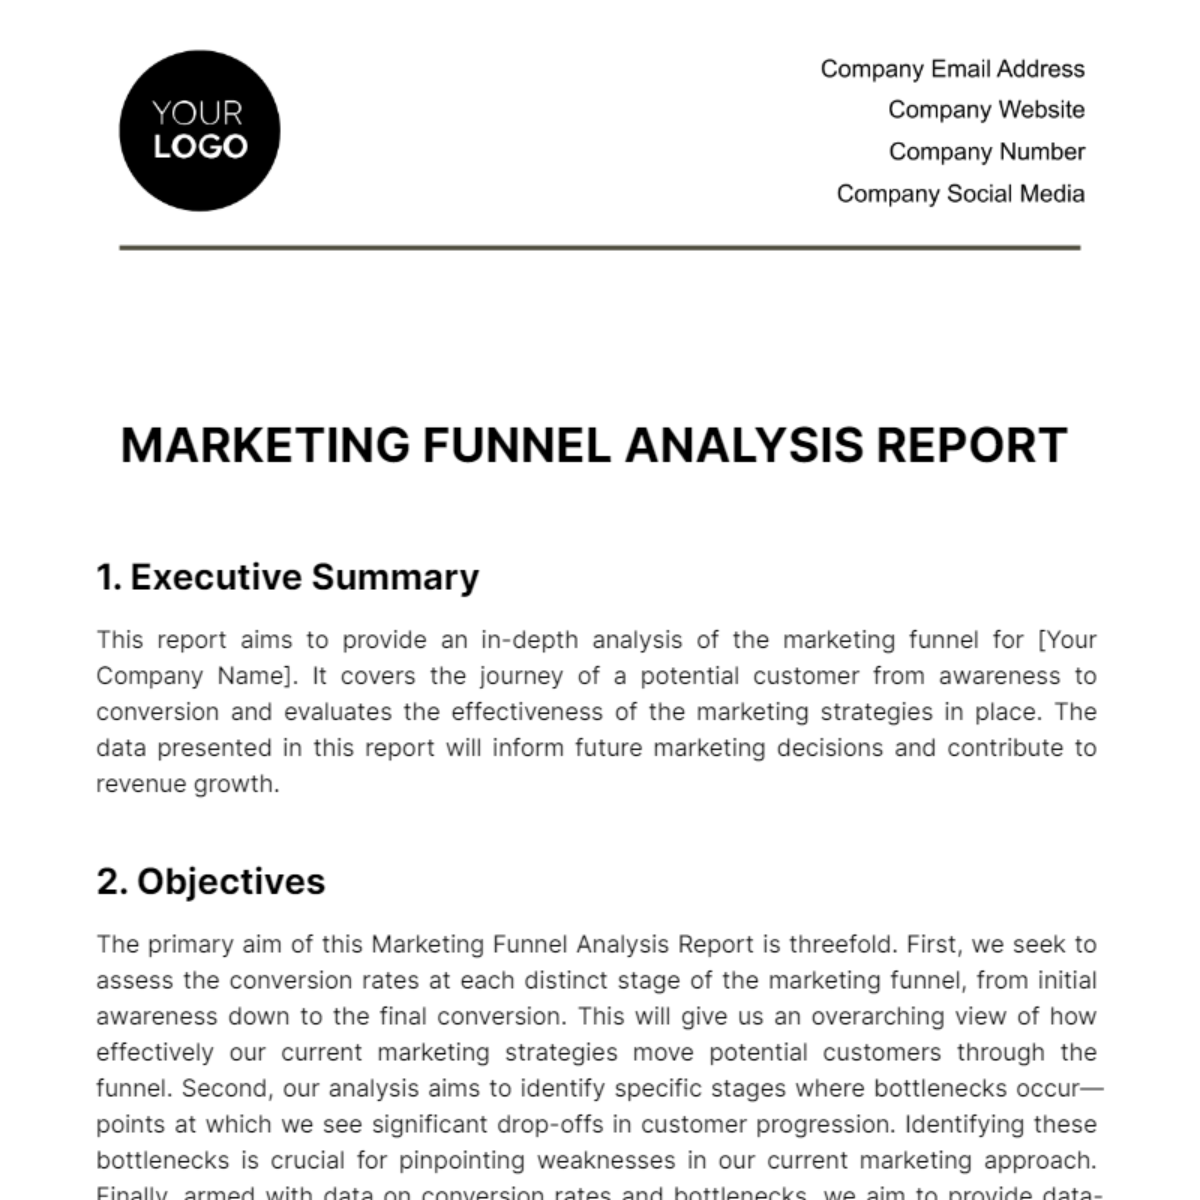 Marketing Funnel Analysis Report Template